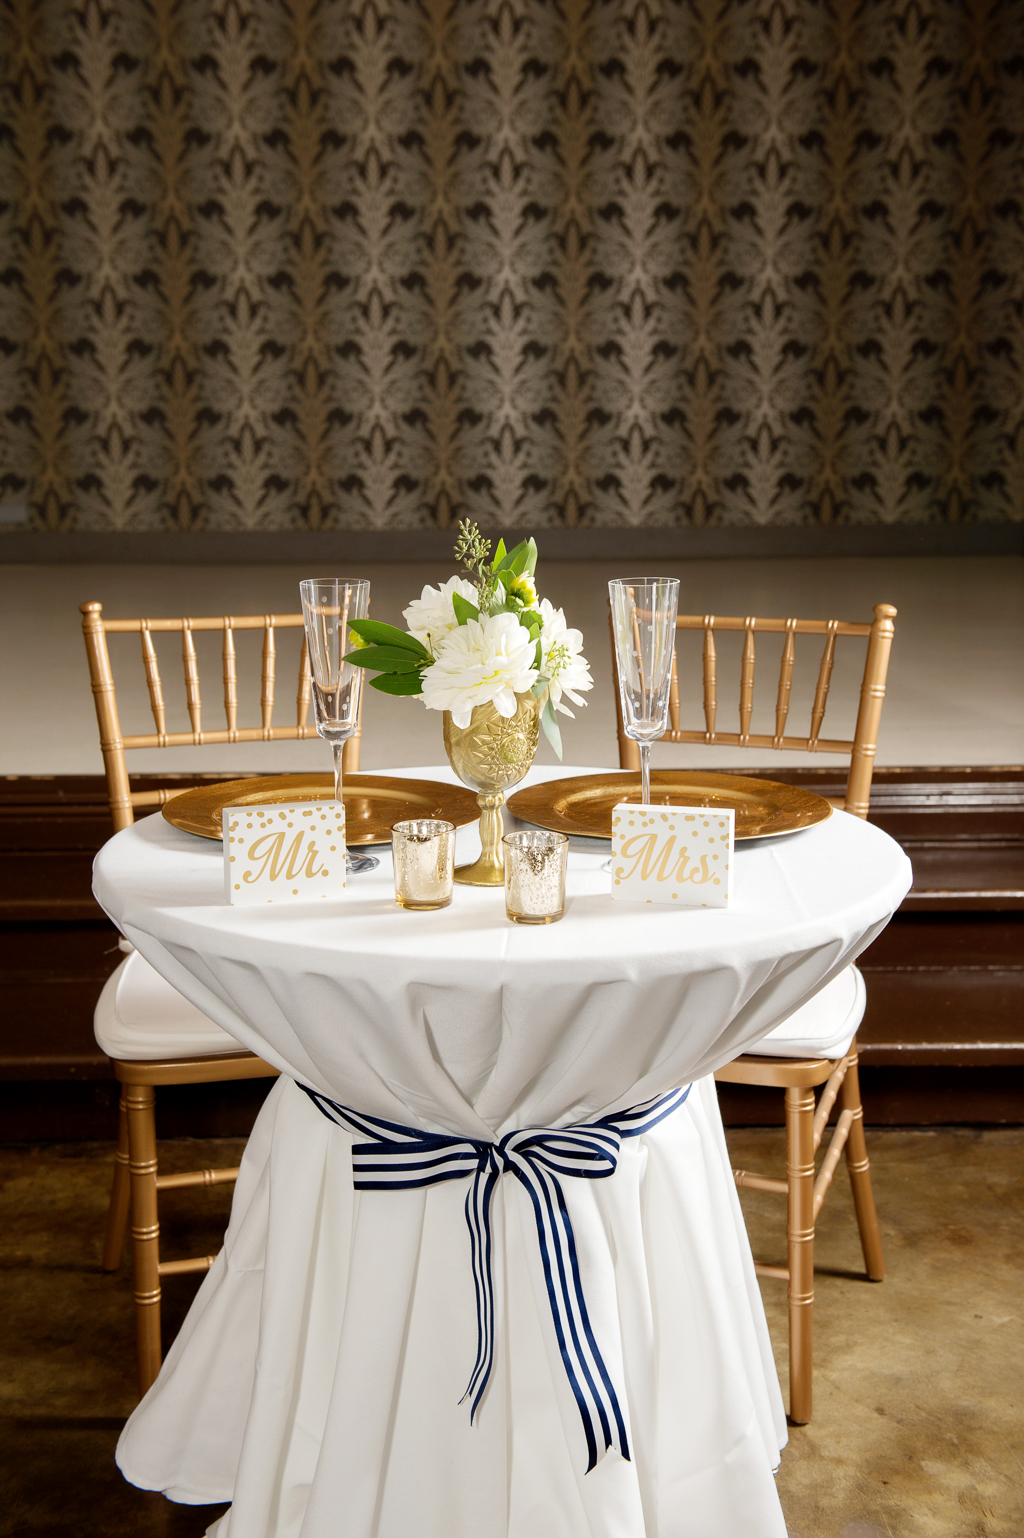 a bride and groom sweetheart table is covered in white cloth and tied with a navy and white ribbon next to gold chairs and a gold goblet filled with ivory flowers